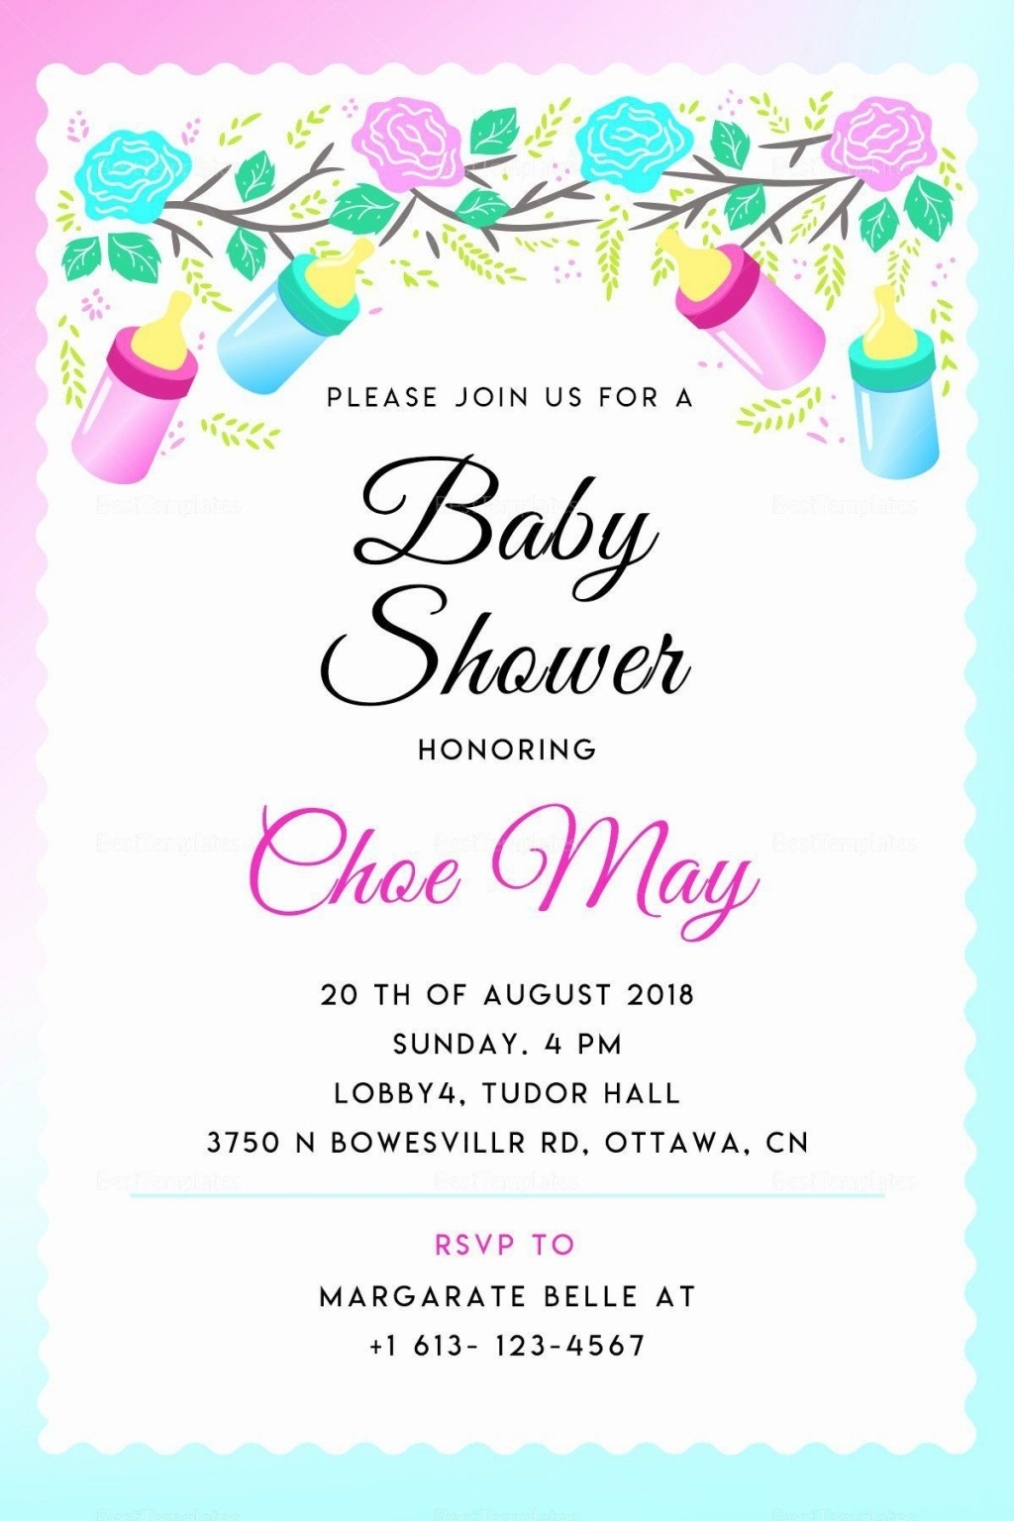 Baby Shower Programme Example / Free 15+ Baby Shower Flyer Templates In Psd | Ai With Regard To Baby Shower Flyer Template